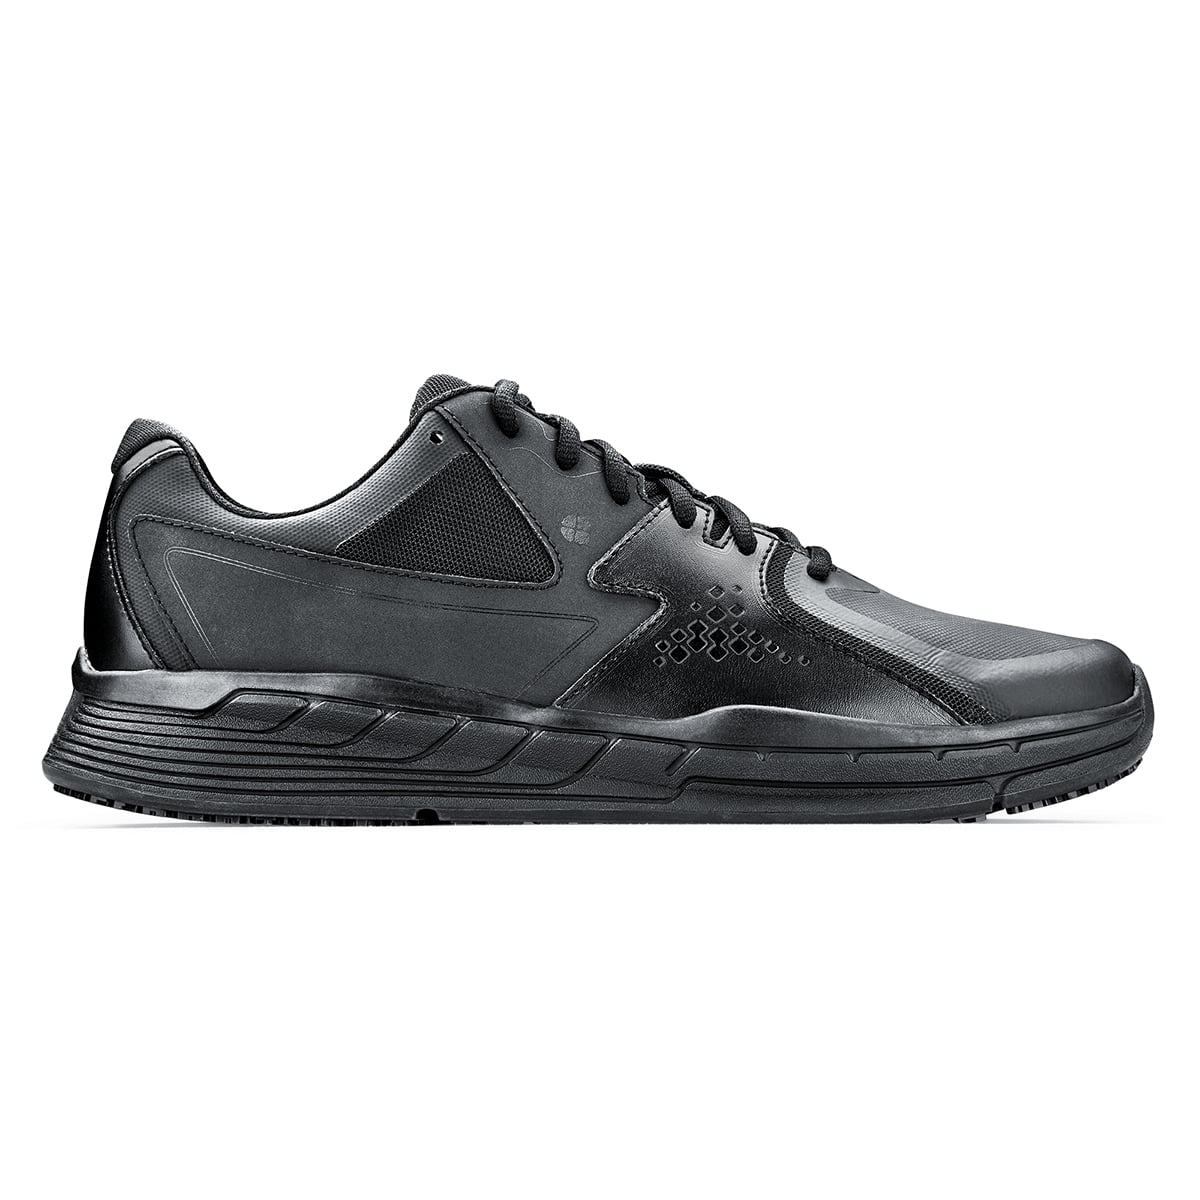 The Condor Men's Black from Shoes for Crews is a slip-resistant shoe with laces, with additional padding and a removable cushioned insole, seen from the right.